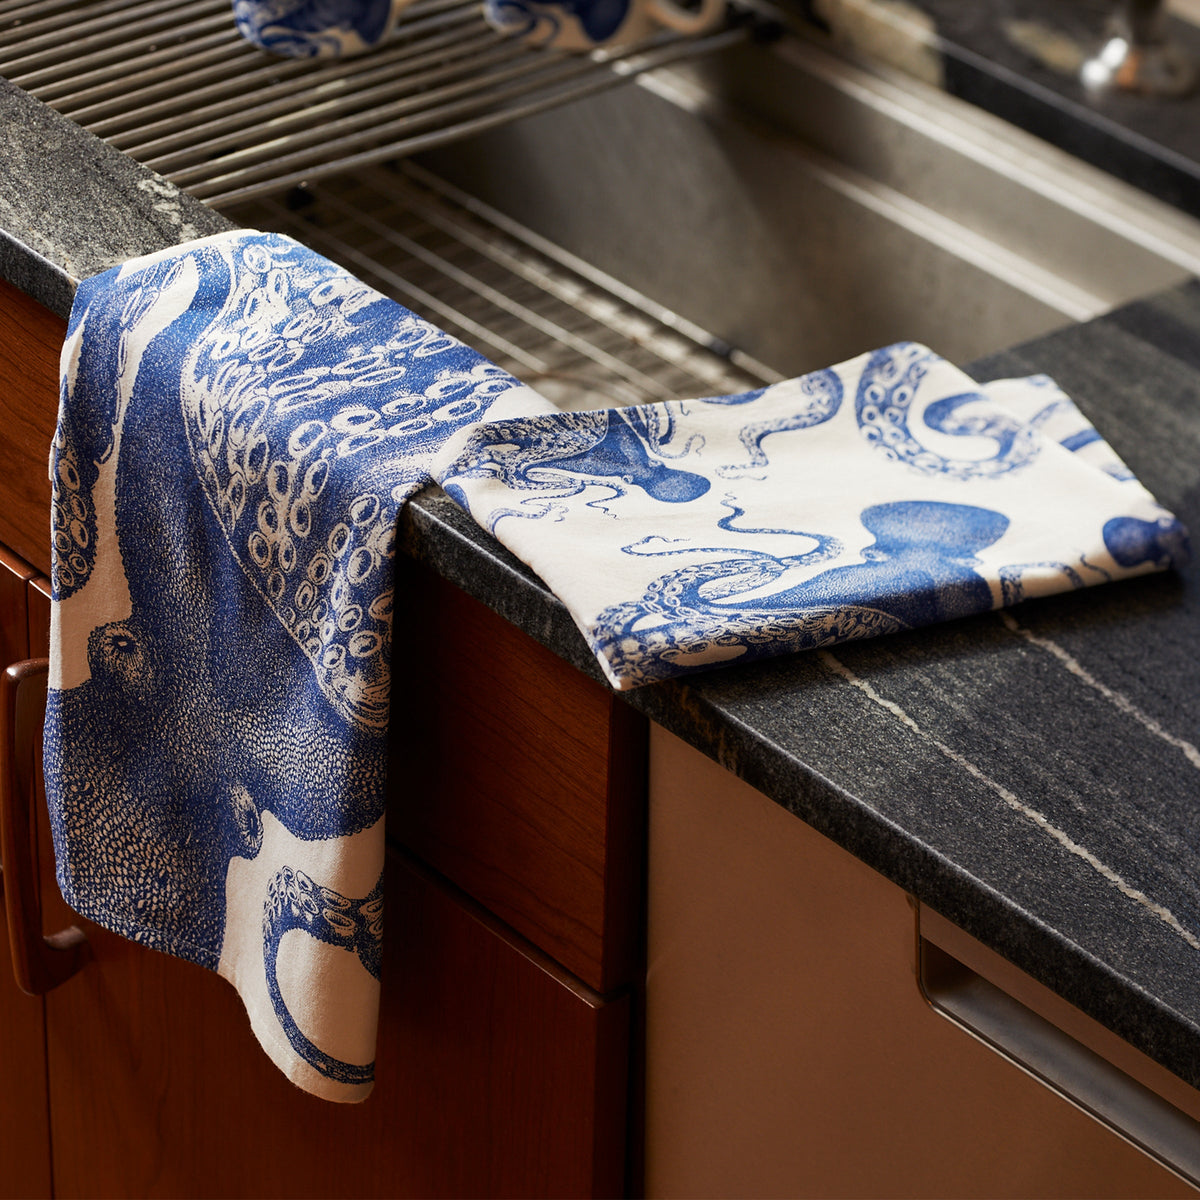 A set of Lucy Kitchen Towels, Set of 2 by Caskata adds a whimsical touch to the kitchen. One cotton tea towel with a blue octopus design is draped over the handle of a wooden cabinet beside the sink, while another rests playfully on the countertop. These delightful kitchen companions bring both style and function to your space.